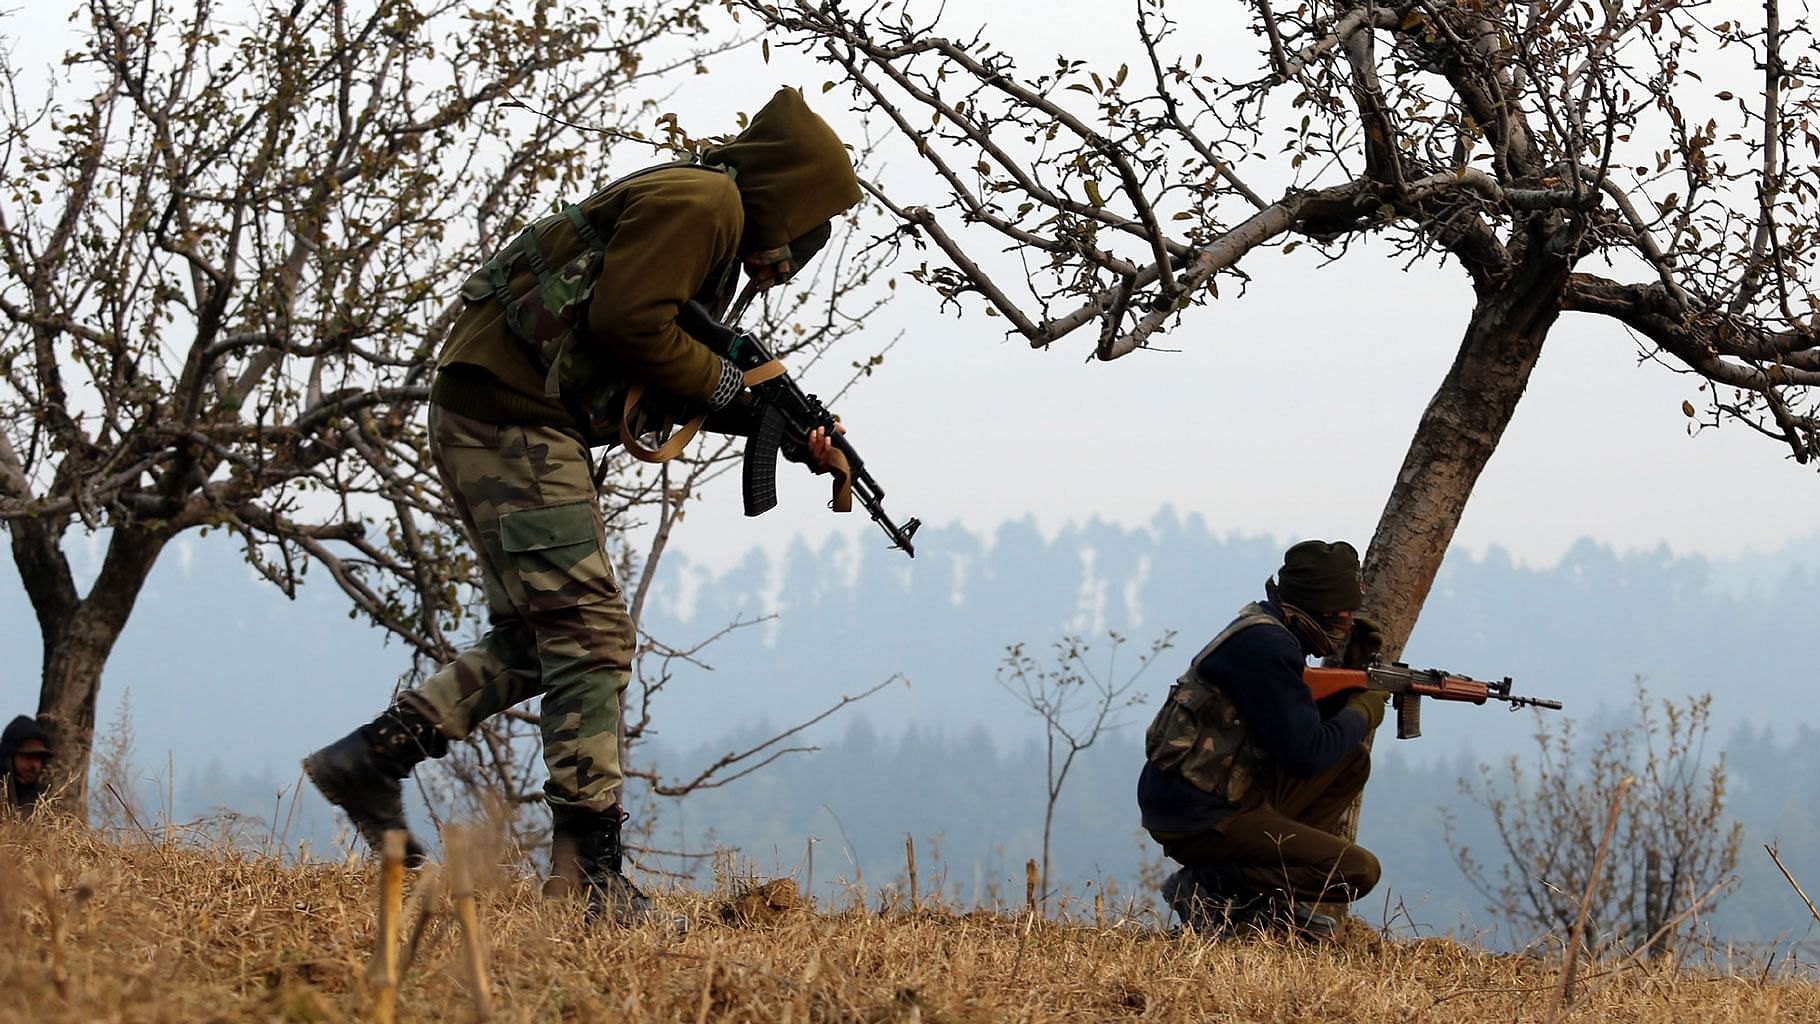 <div class="paragraphs"><p>Four terrorists were killed in the encounter between terrorists and security forces in the Naira area of Pulwama. Representative image only.</p></div>